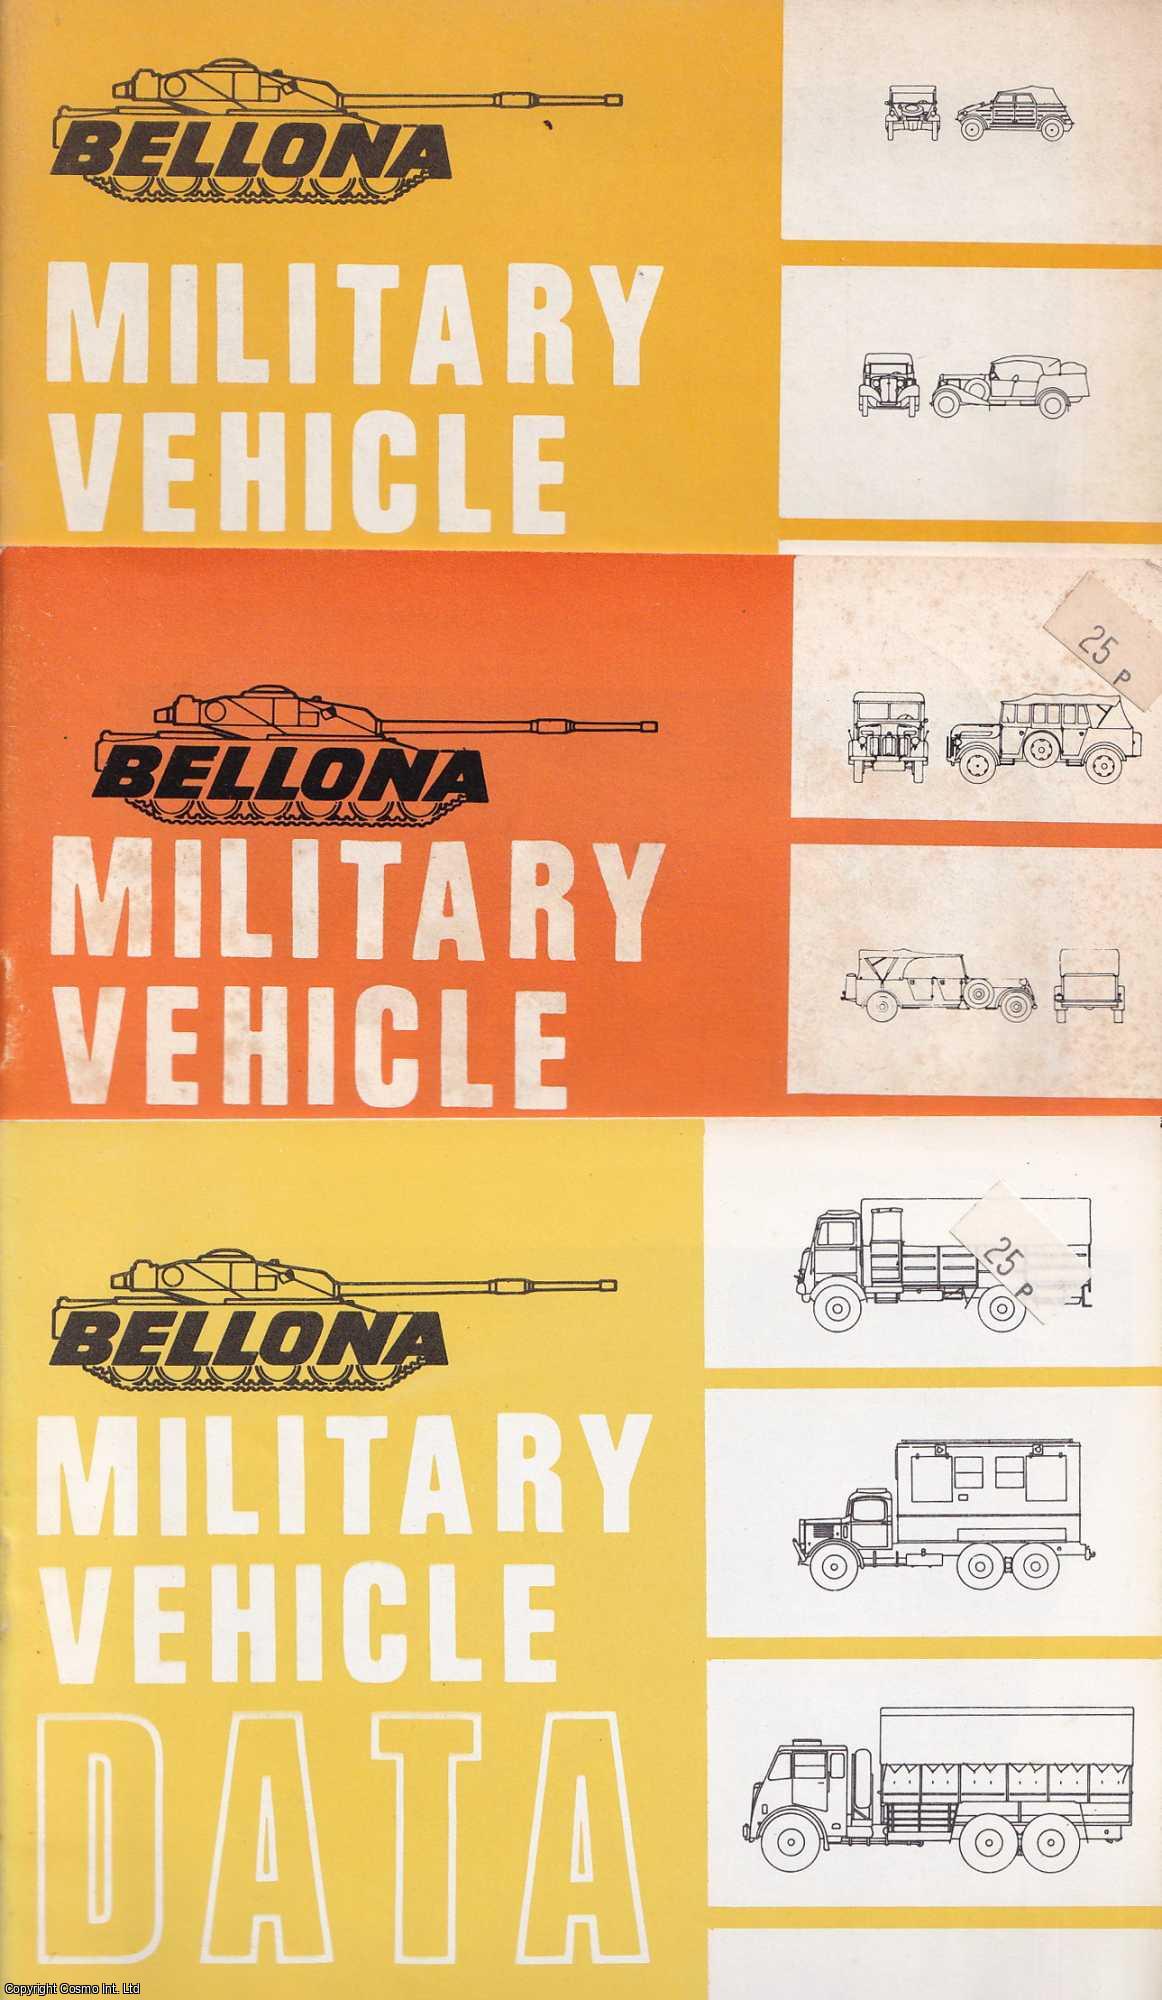 Research by W.J. Spielberger - Bellona Military Vehicle Data. Issues 3, 5, & 10. See pictures for content detail. Published by Bellona 1970-73.